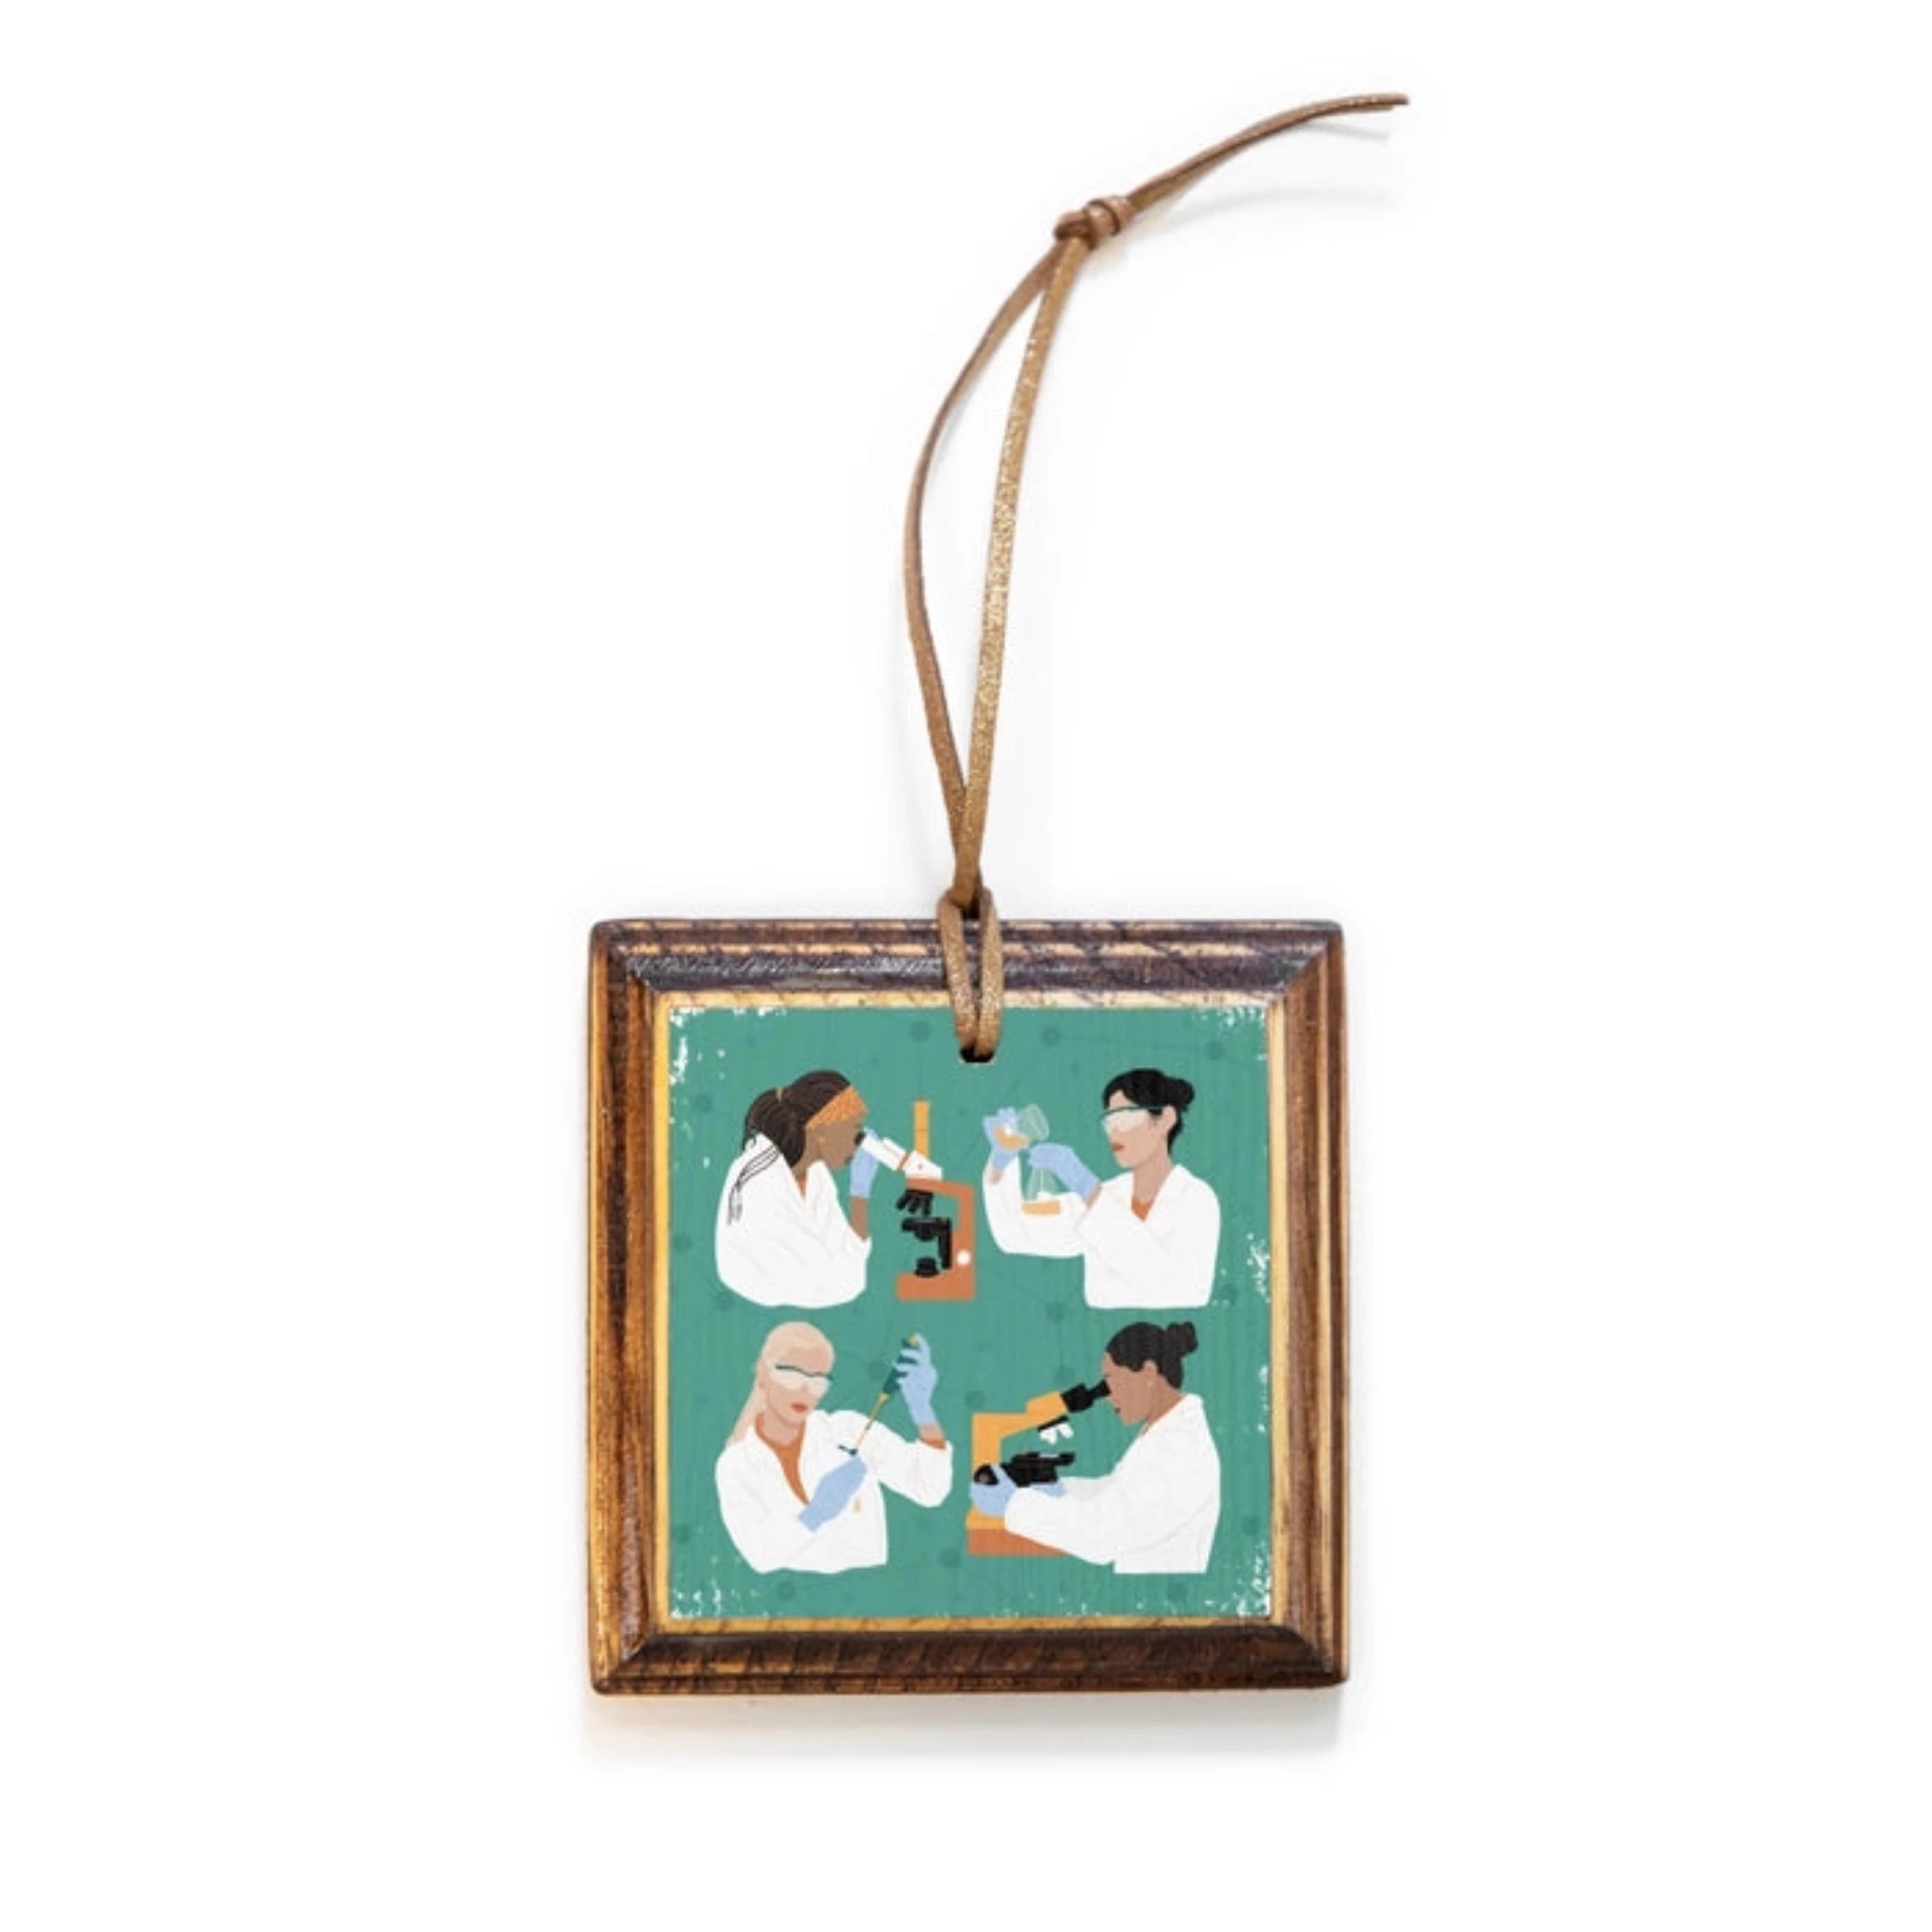 Square wooden ornament with four diverse women in lab coats with scientific equipment on a teal background